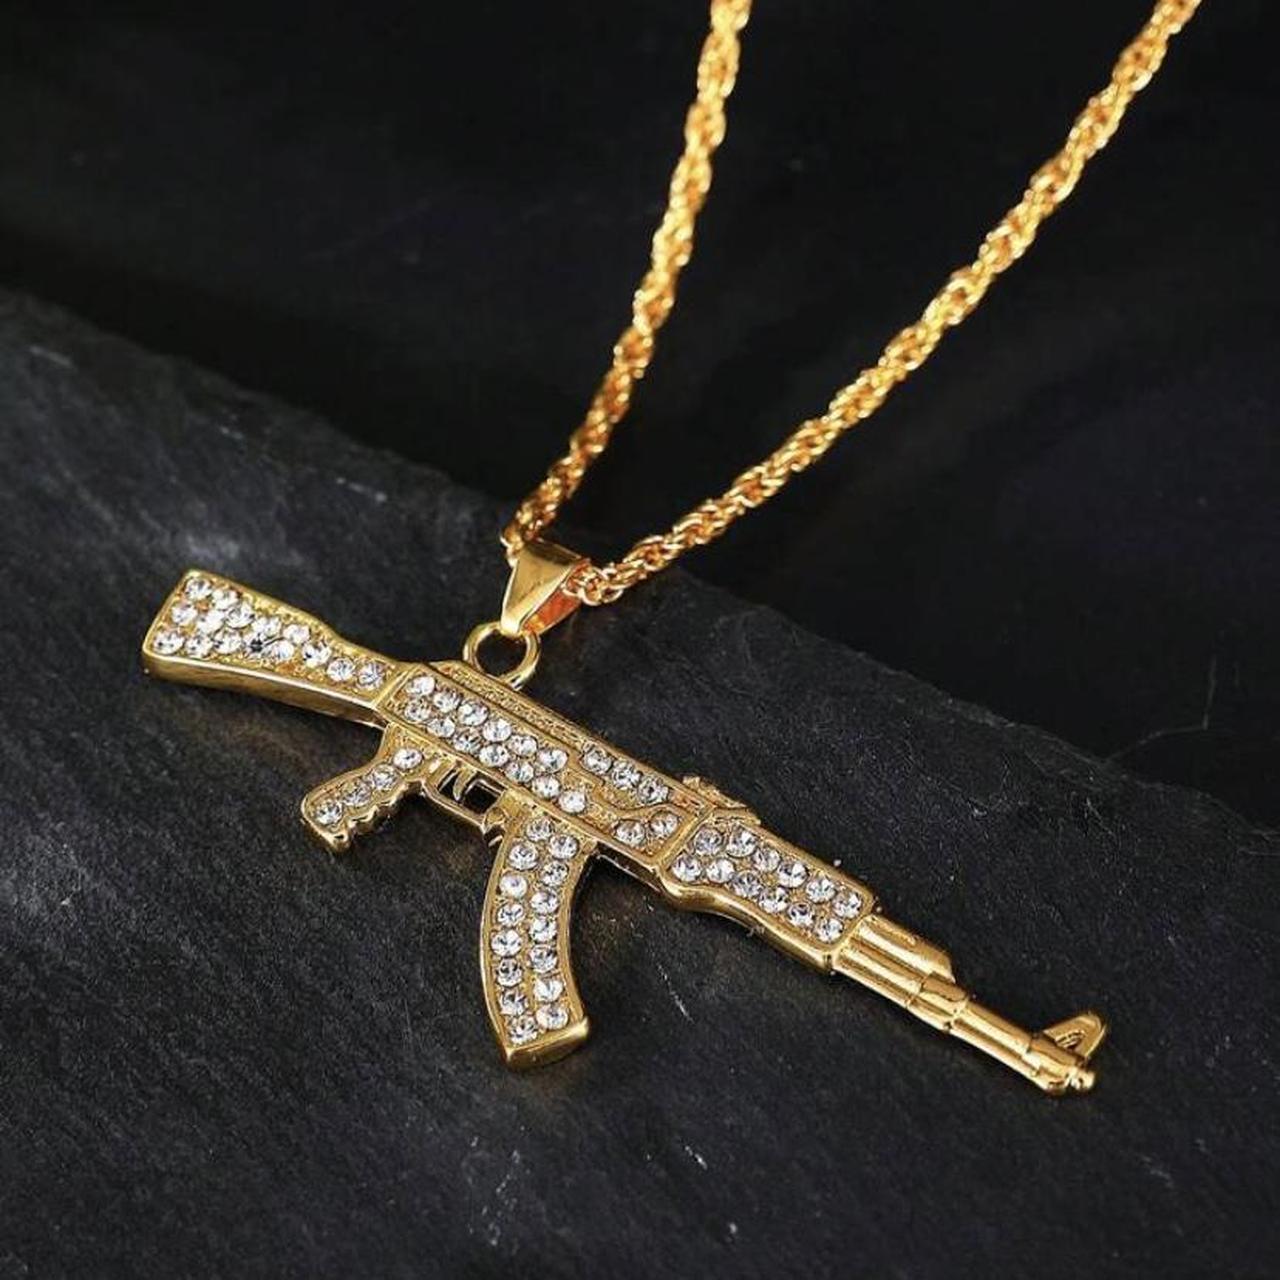 Buy AK-47 Rifle Necklace Online in India - Etsy